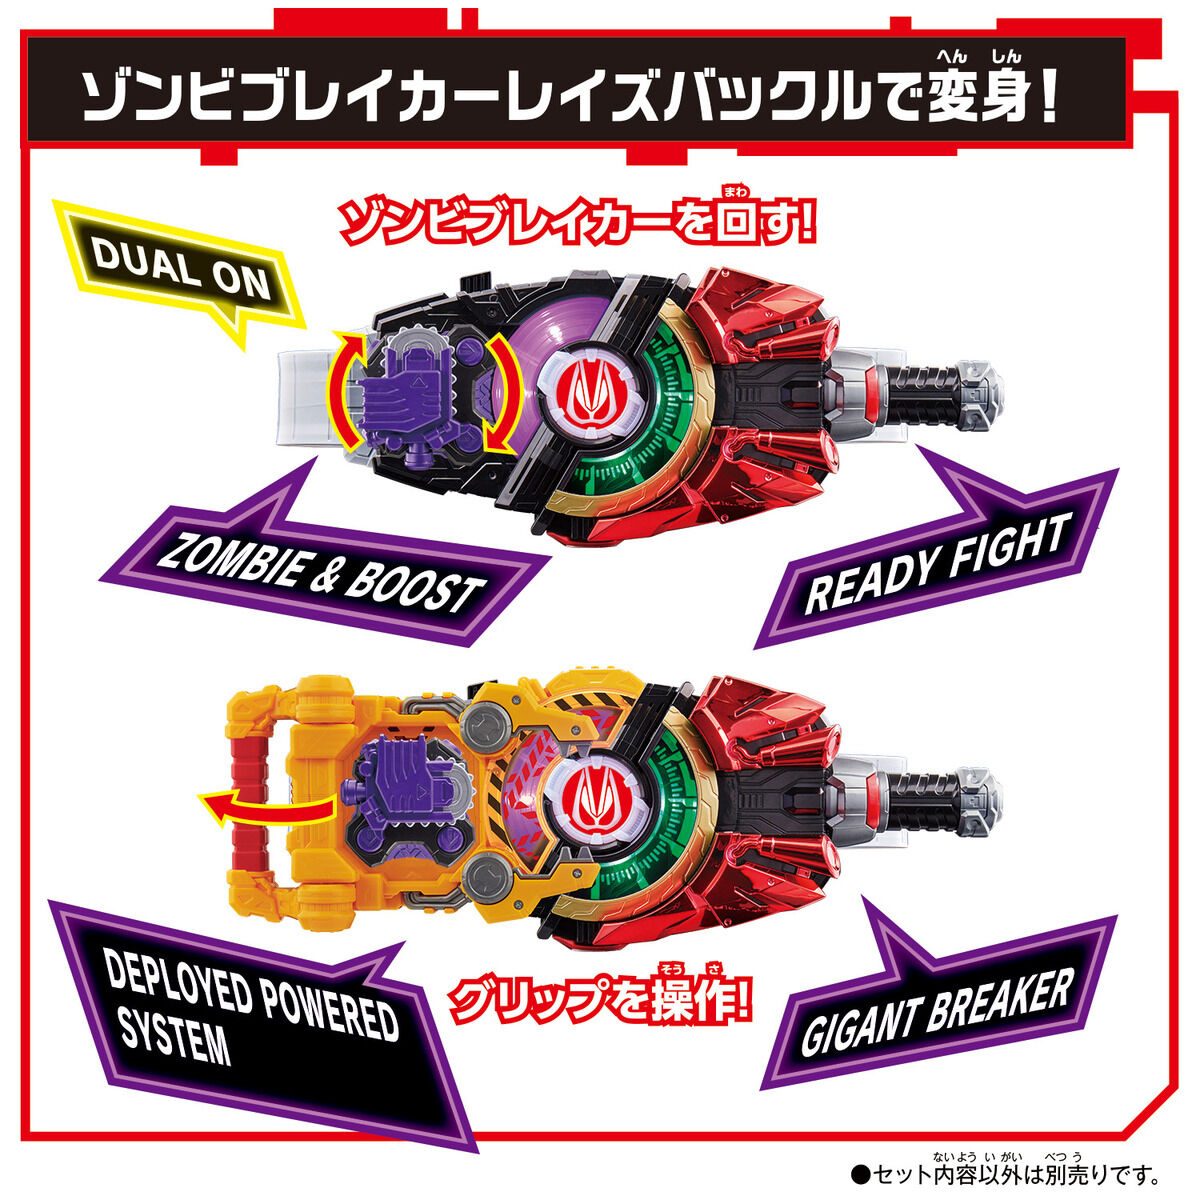 Support Mission Box Type Geats & Weapon Raise Buckle Set